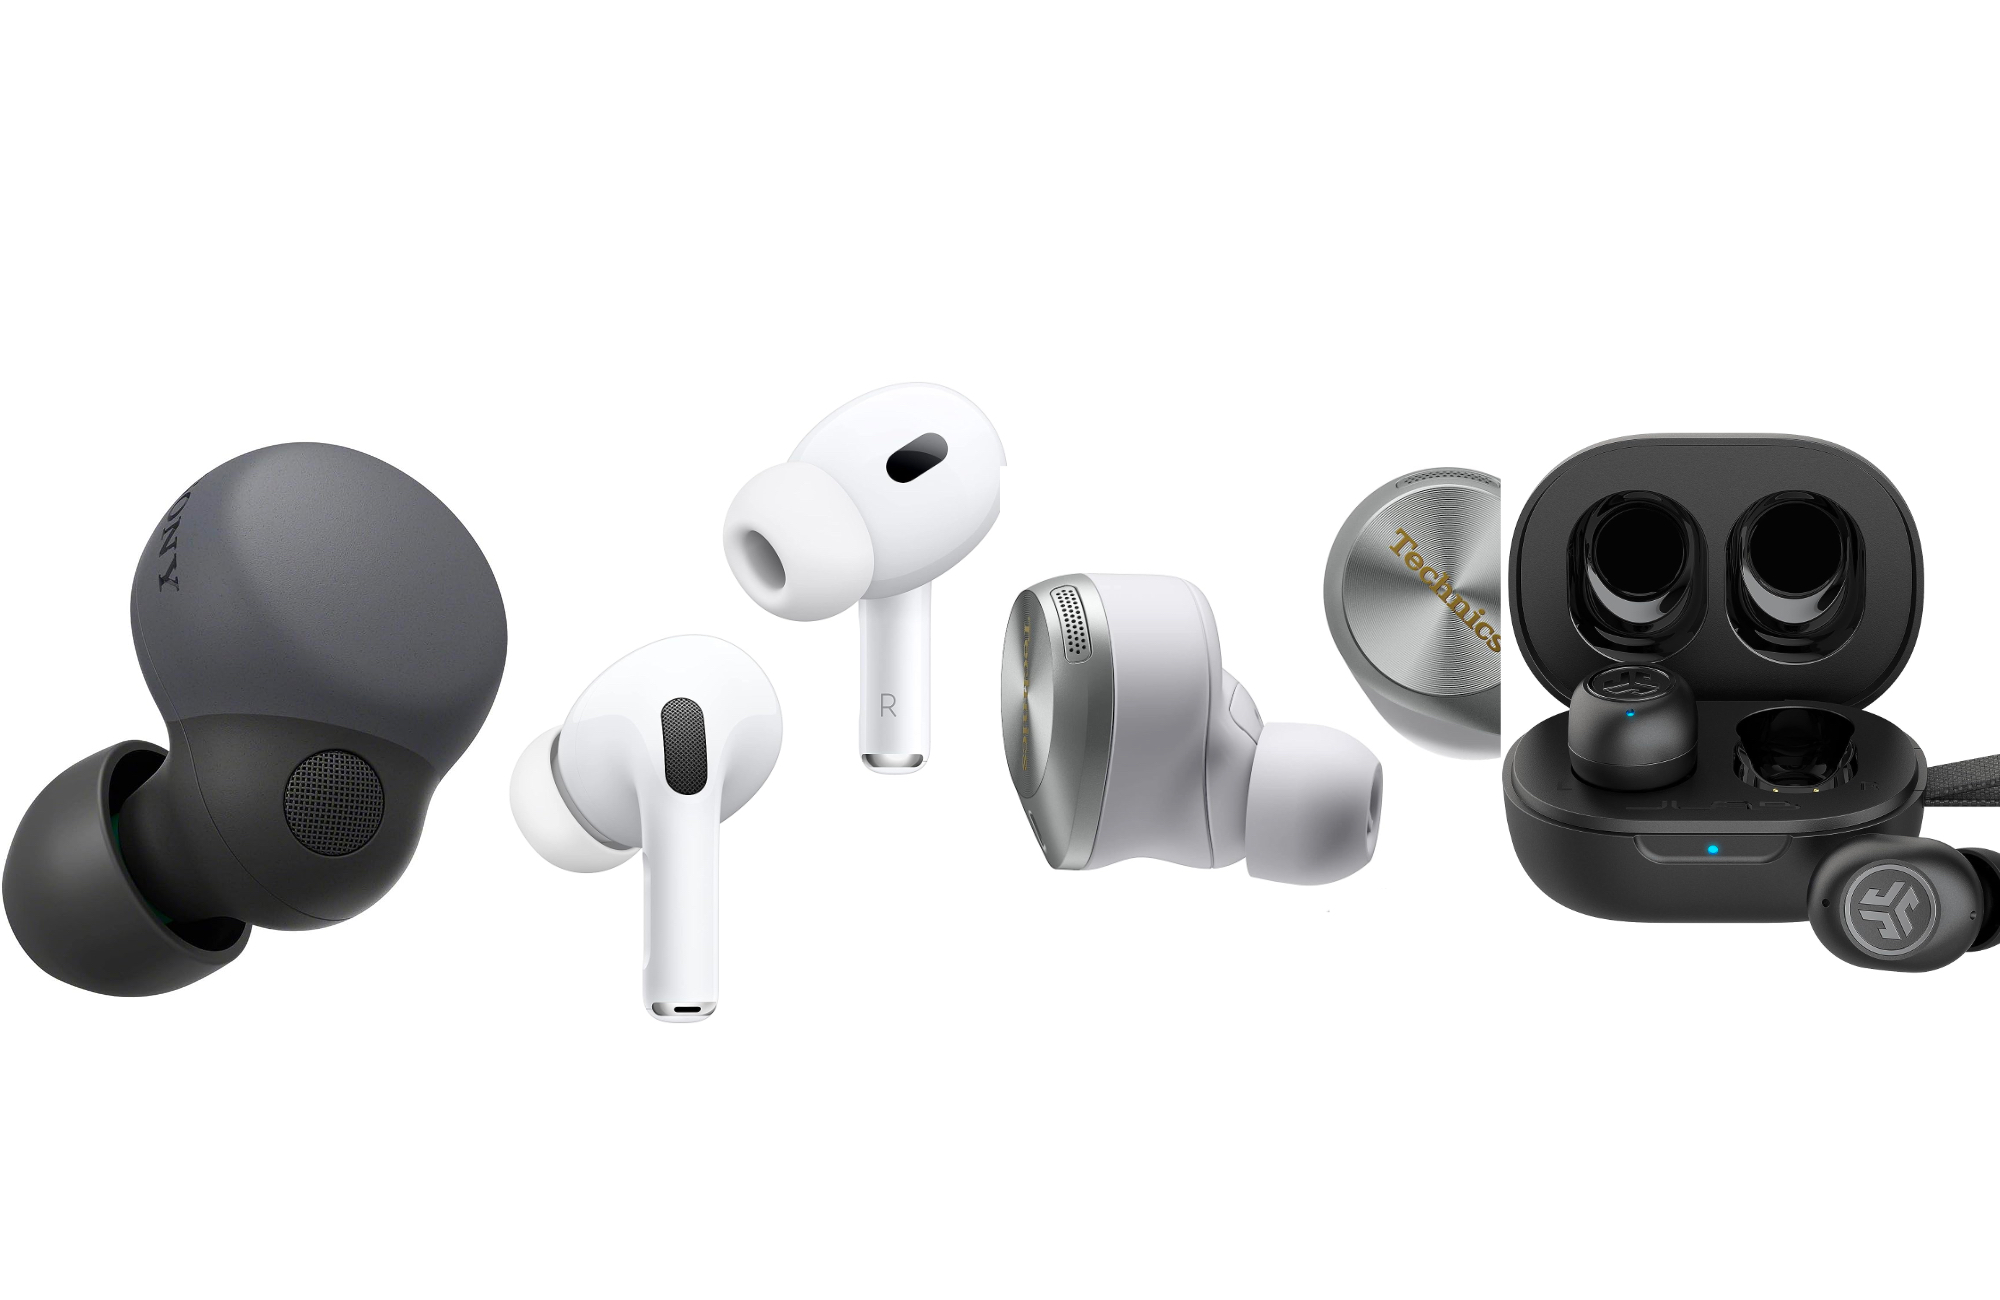 The Best Noise-Cancelling True Wireless Earbuds for 2024